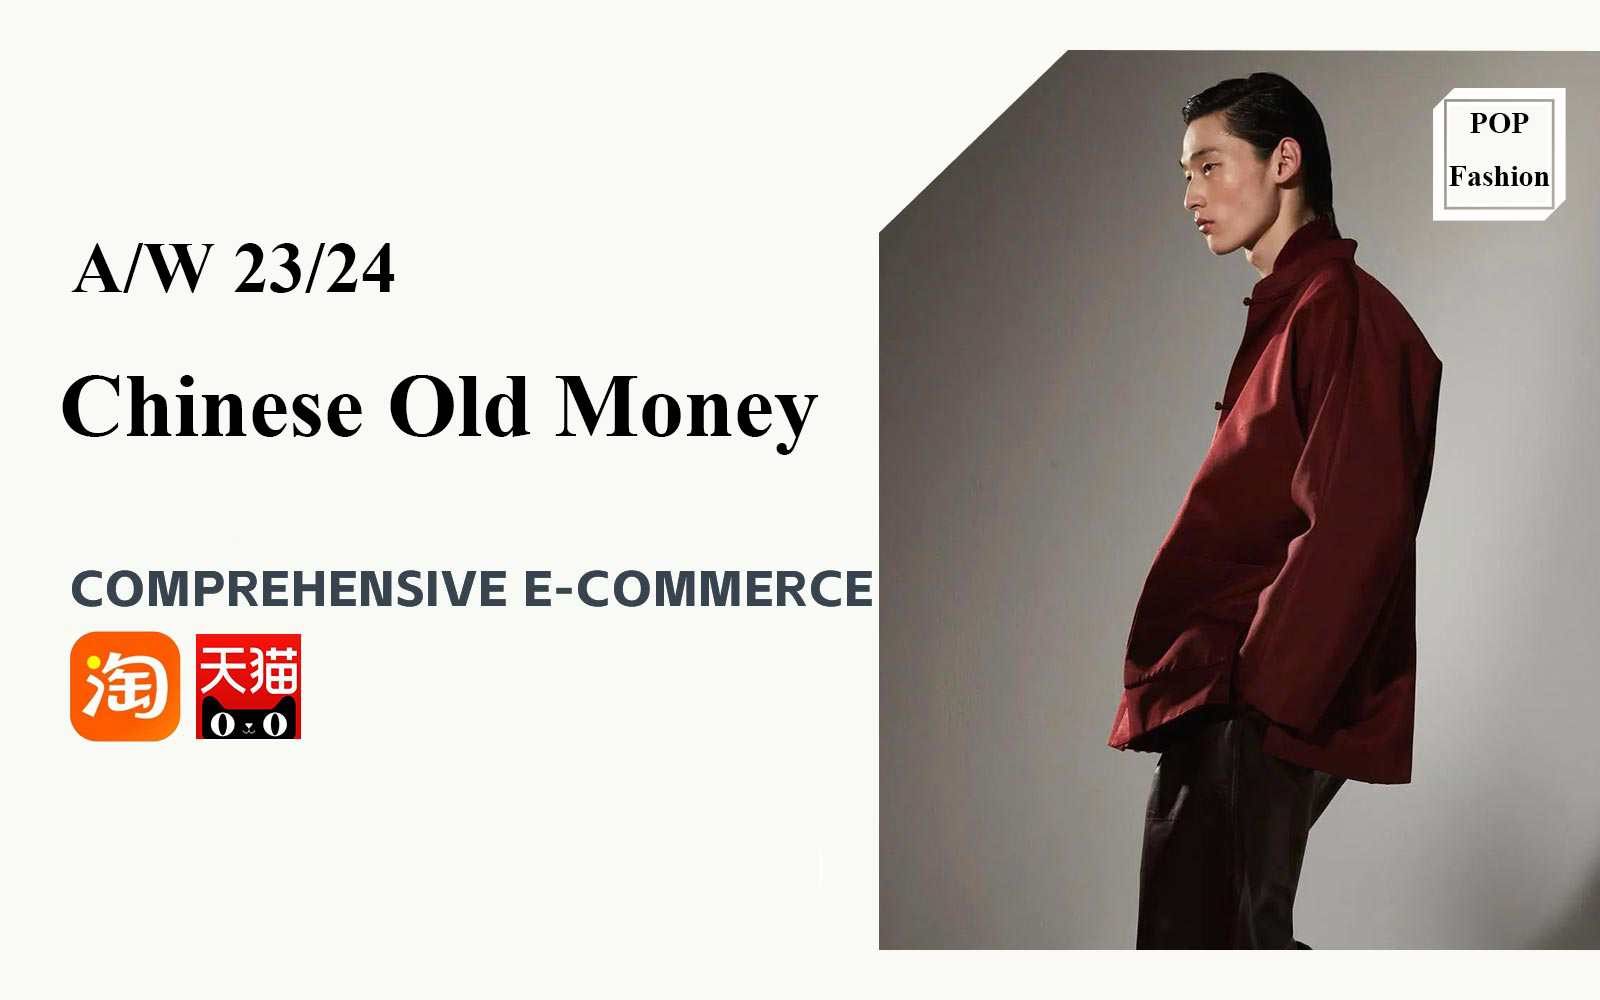 Chinese Old Money -- The Comprehensive Analysis of Menswear E-Commerce Brand